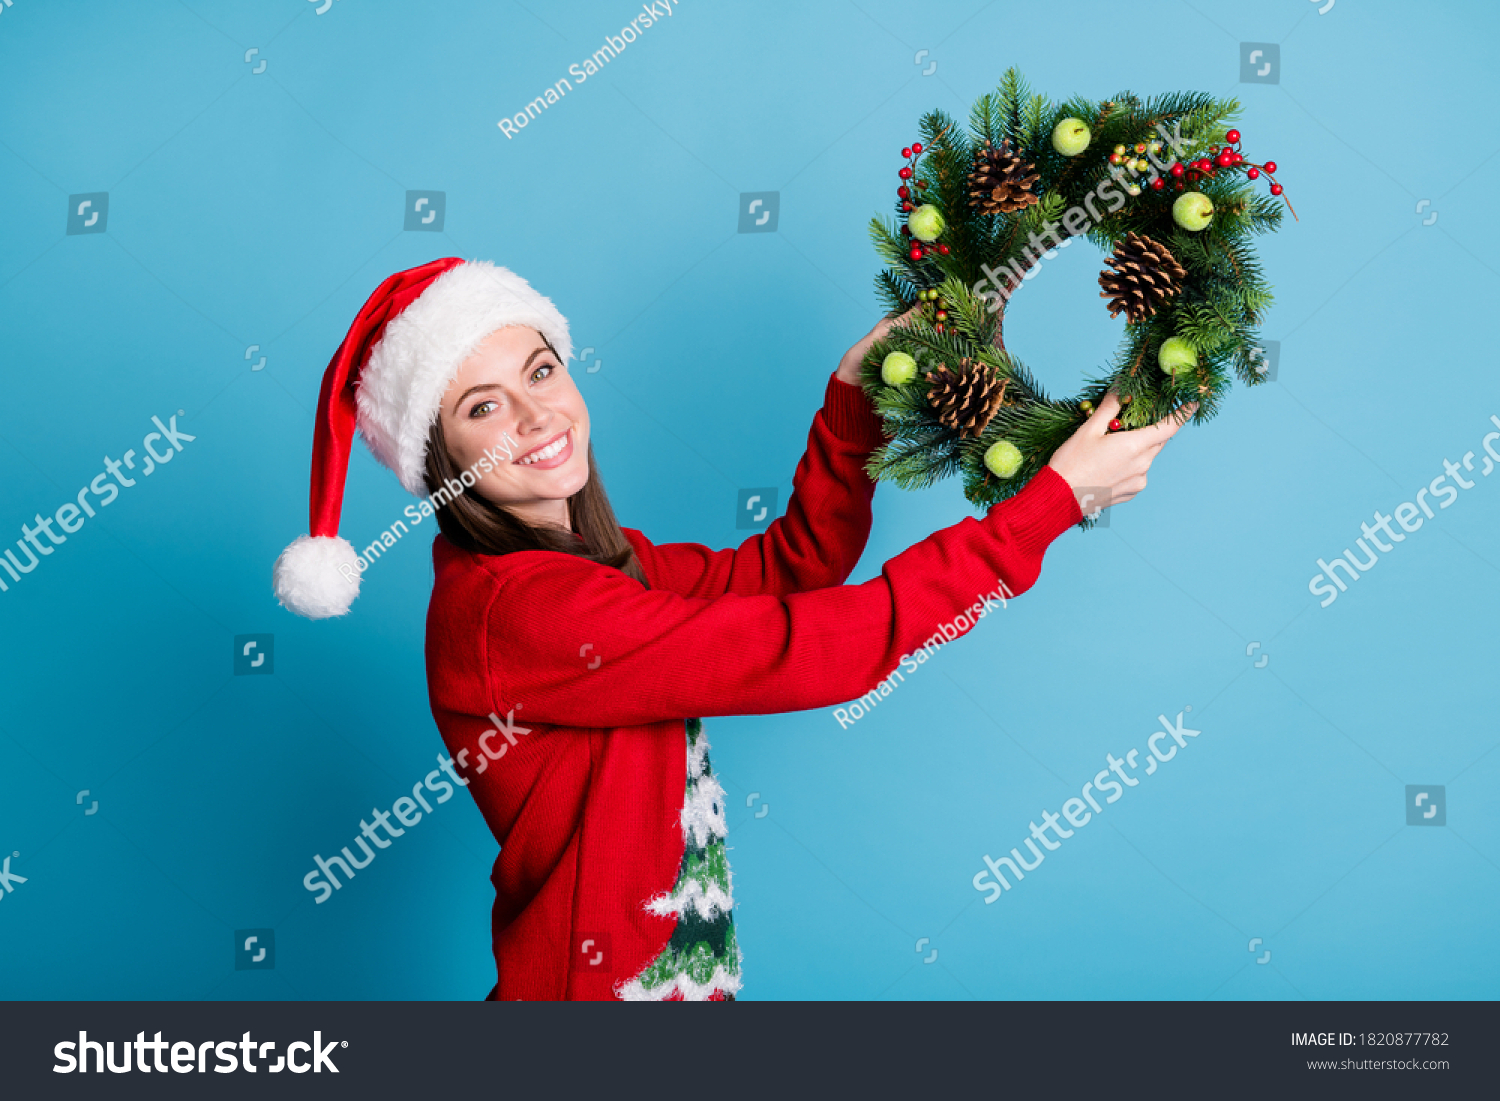 Portrait photo of girl wearing red xmas headwear hanging christmas handmade crafts wreath made of christmas tree branches decorative berries wooden cones isolated on blue color background #1820877782